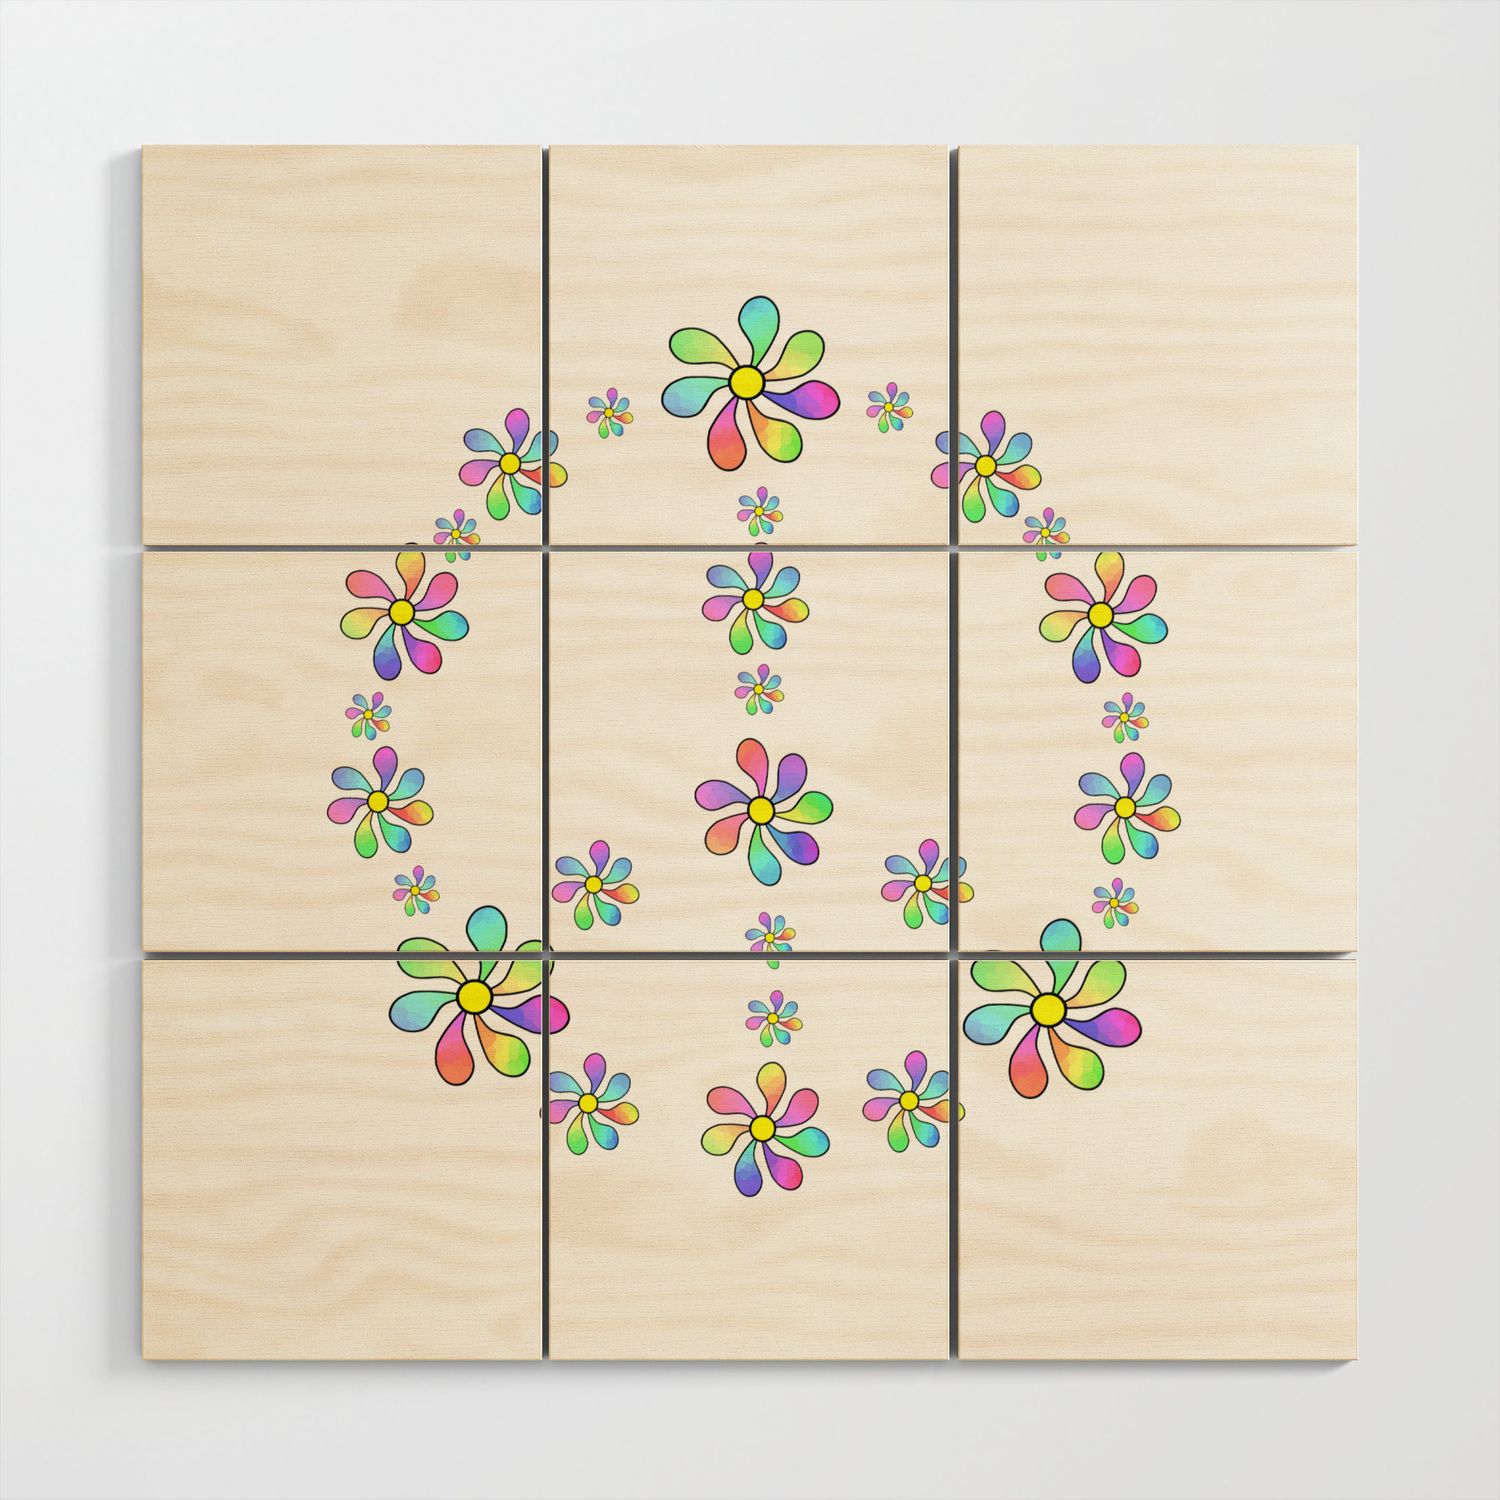 Floral Peace Wood Wall Artsartoris Art | Society6 Intended For Most Recently Released Peace Wood Wall Art (View 8 of 20)